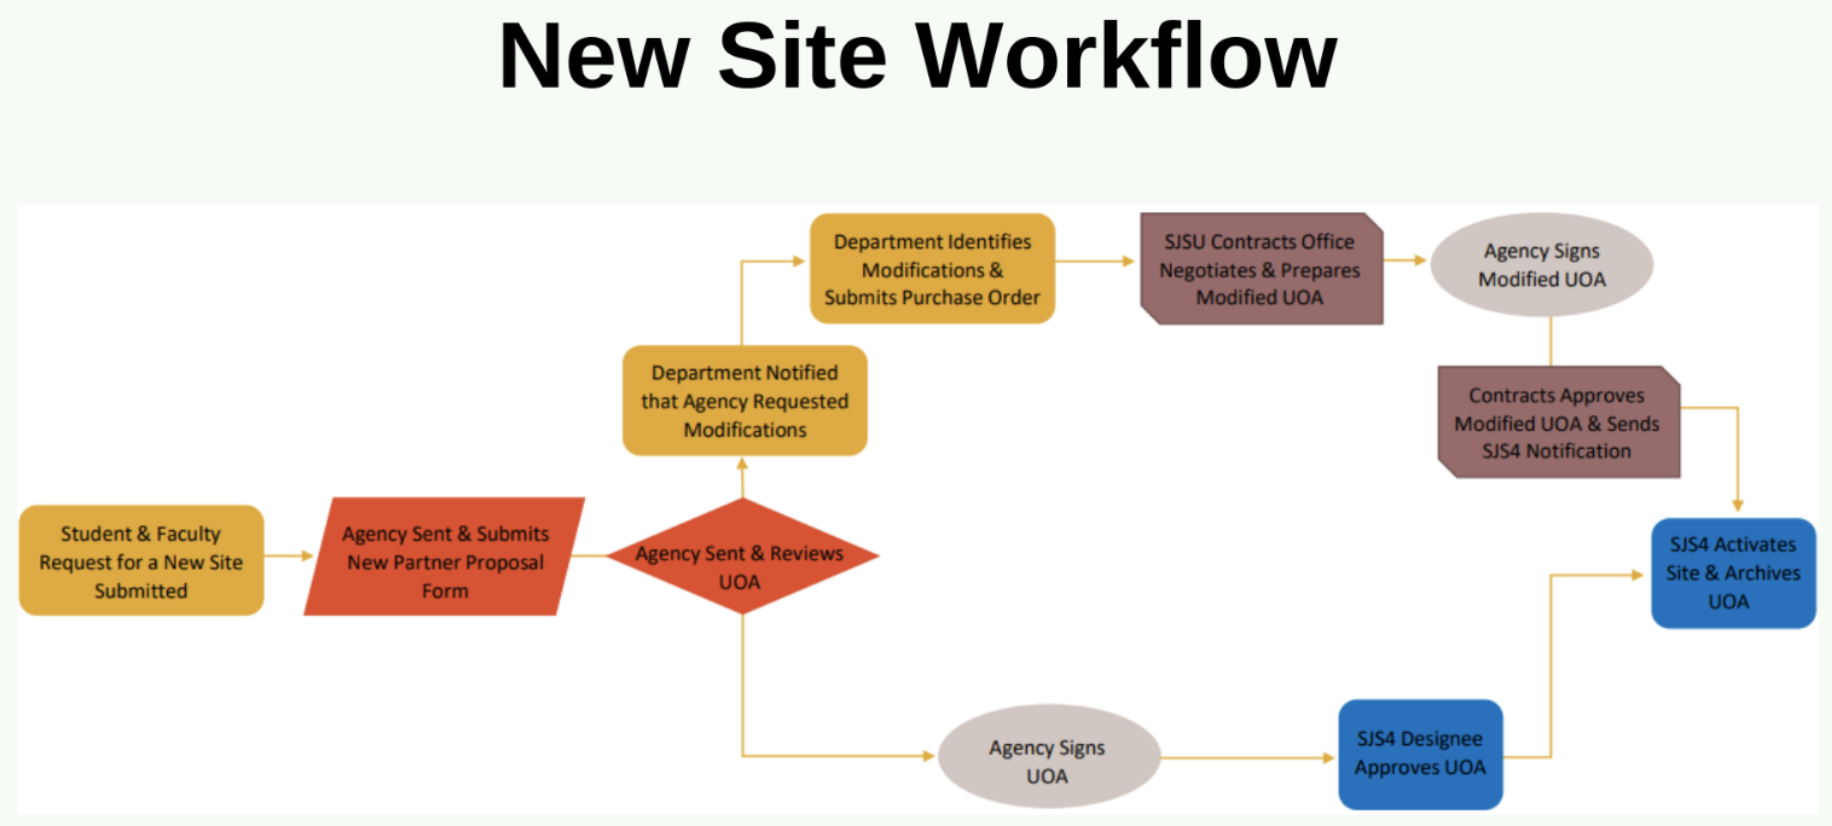 SJS4 Faculty process for requesting a new site - New Site Workflow